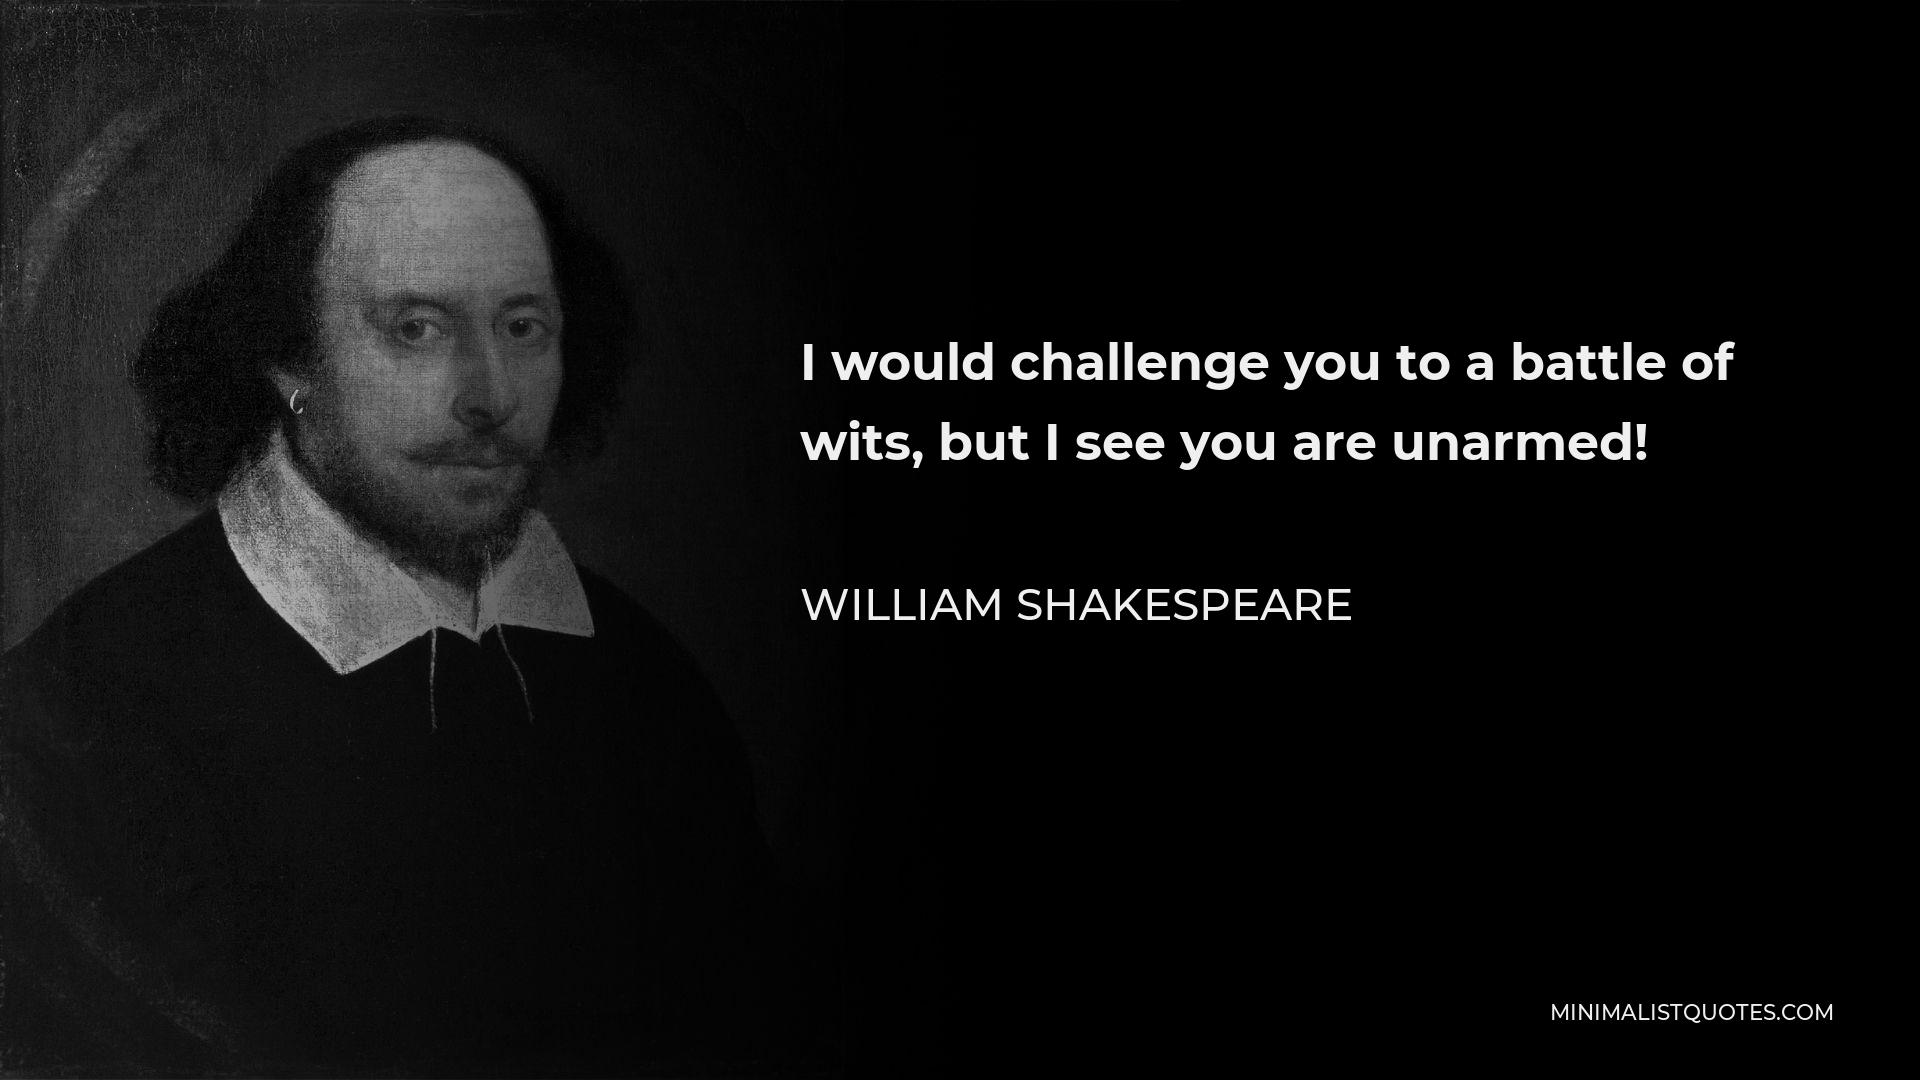 William Shakespeare Quote - I would challenge you to a battle of wits, but I see you are unarmed!